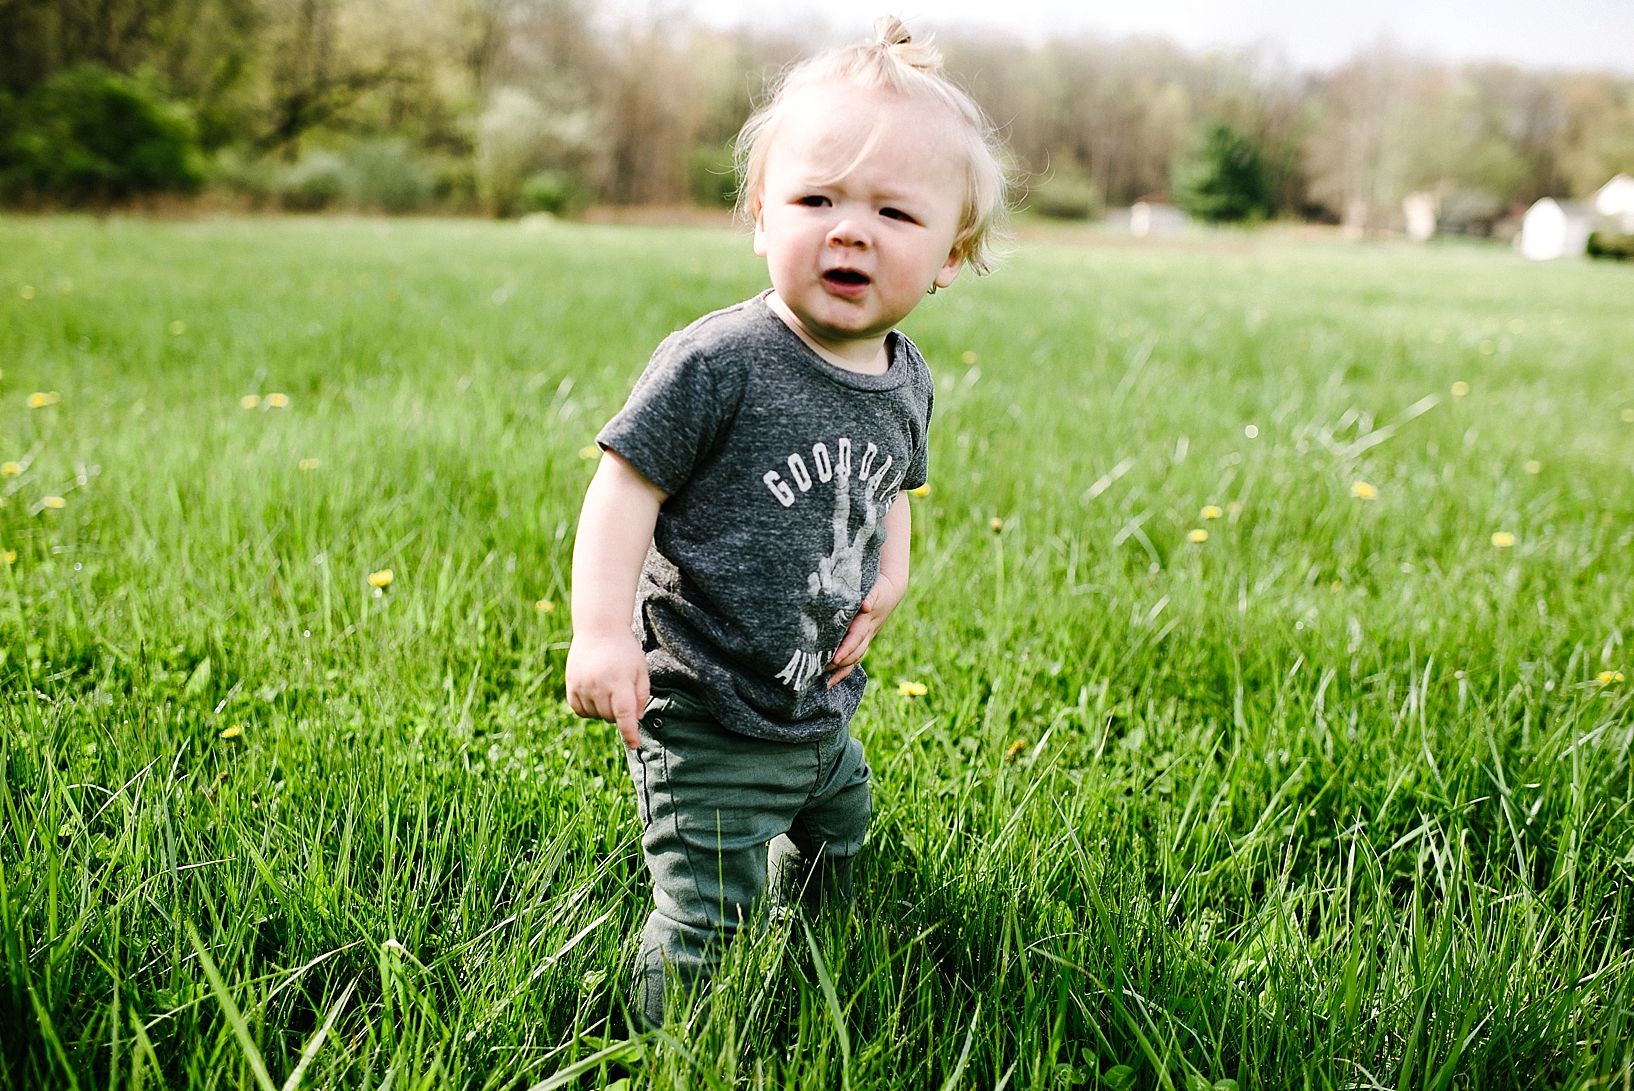 hipster baby standing in field of grass wearing man bun and Good Vibes tshirt